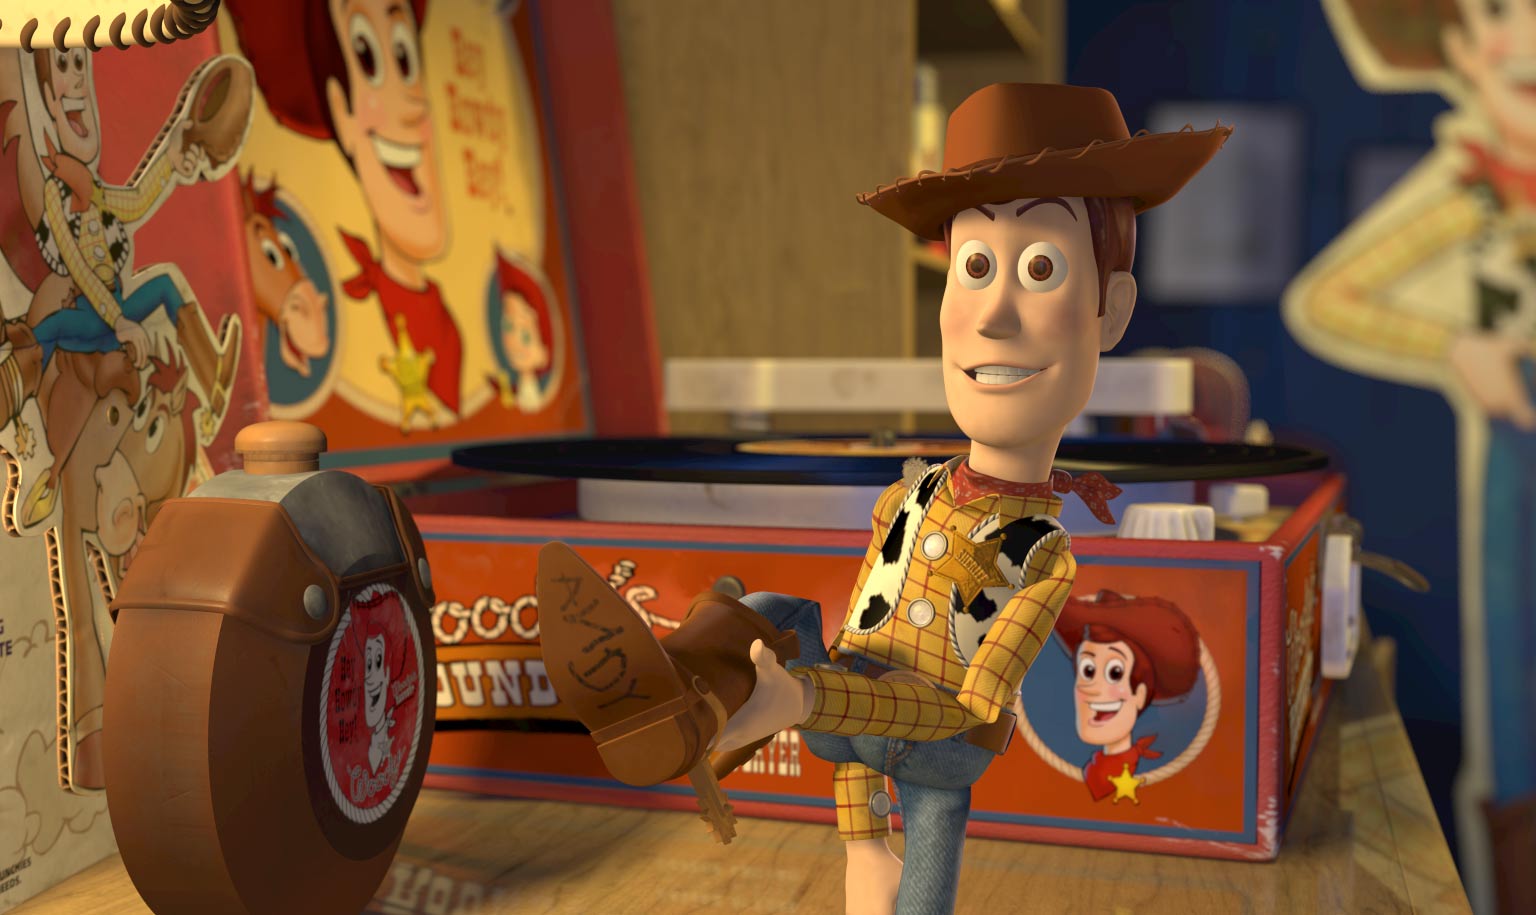 toy story 2 animation style 